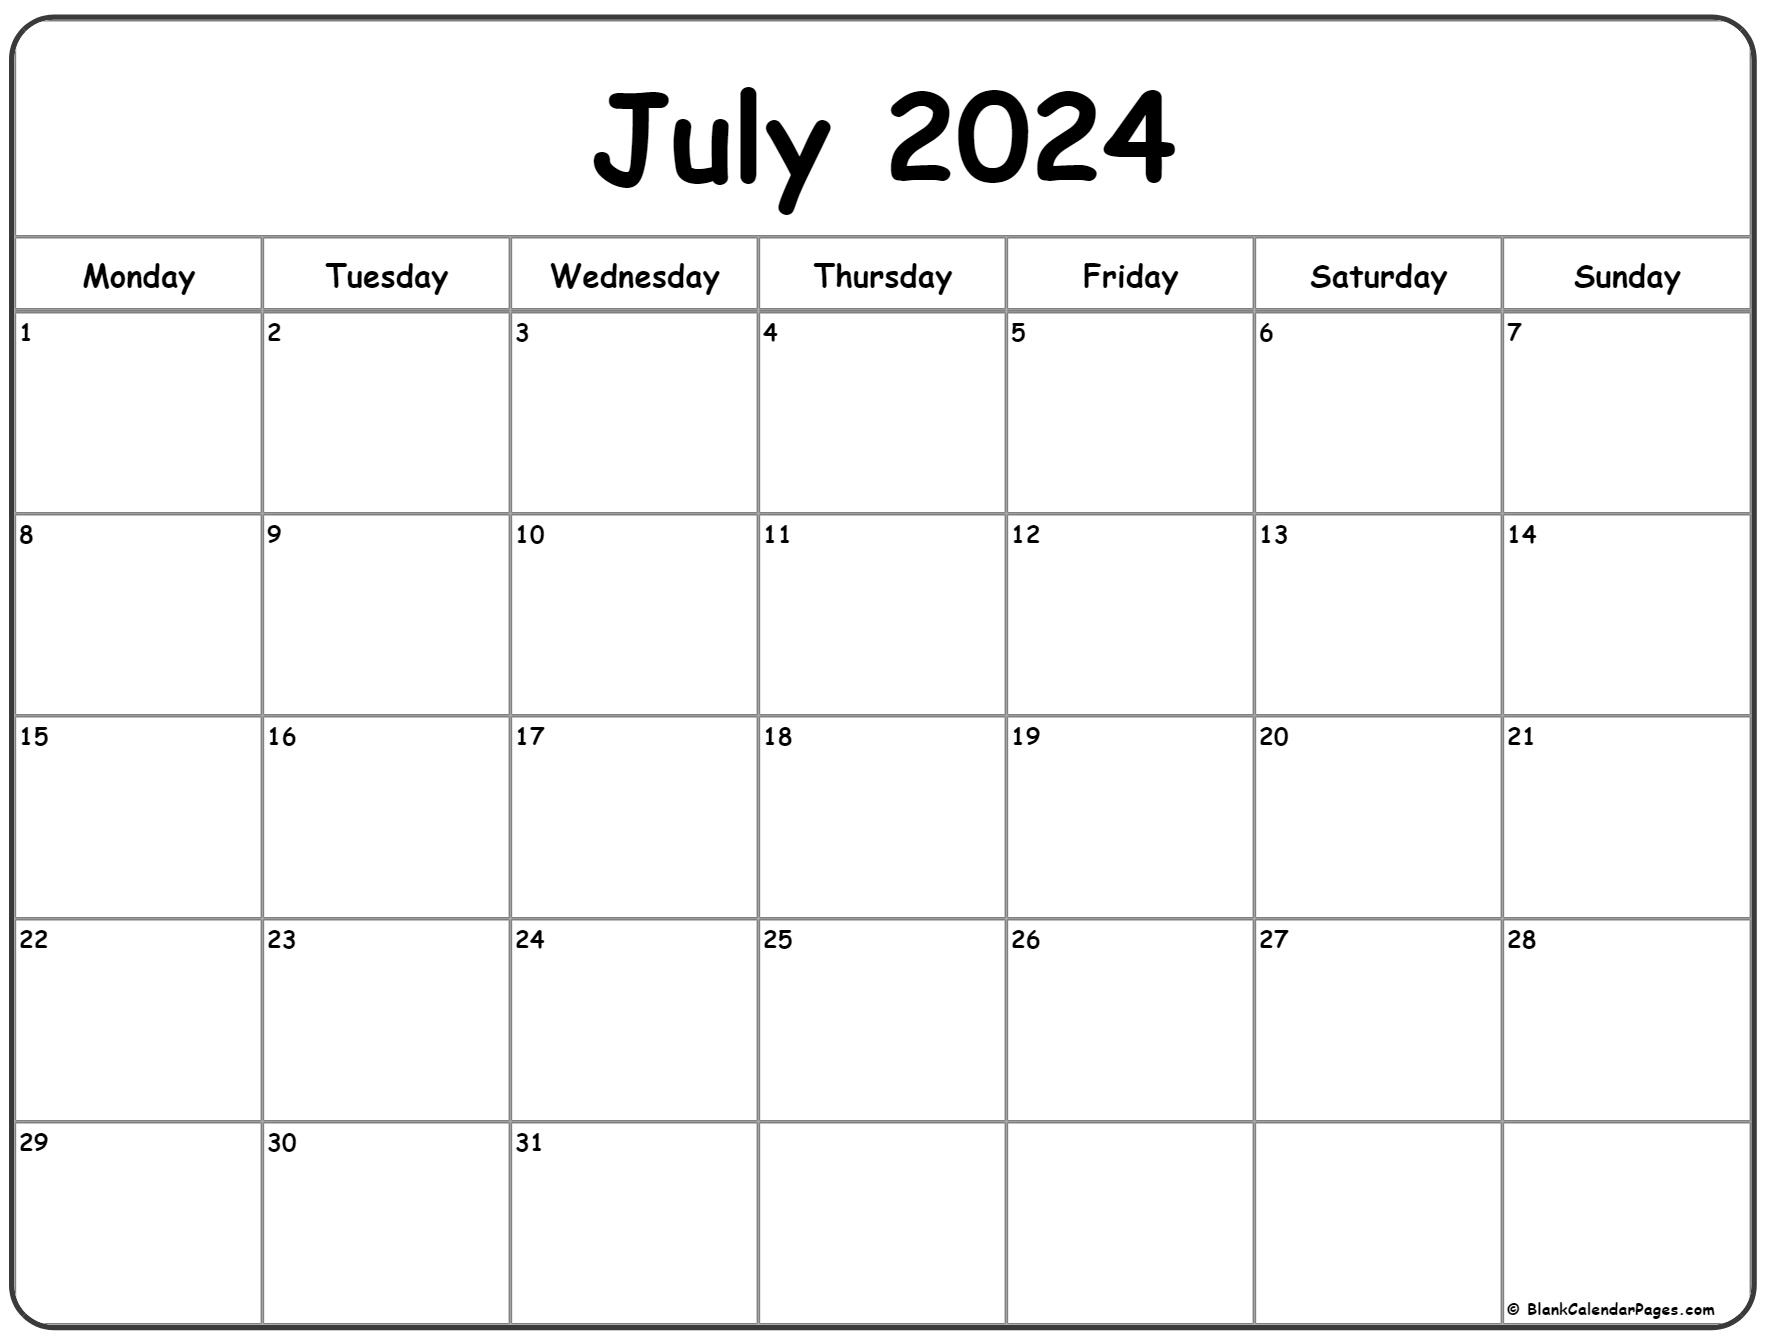 July 2024 Monday Calendar | Monday To Sunday | Let Me See The Calendar For July 2024